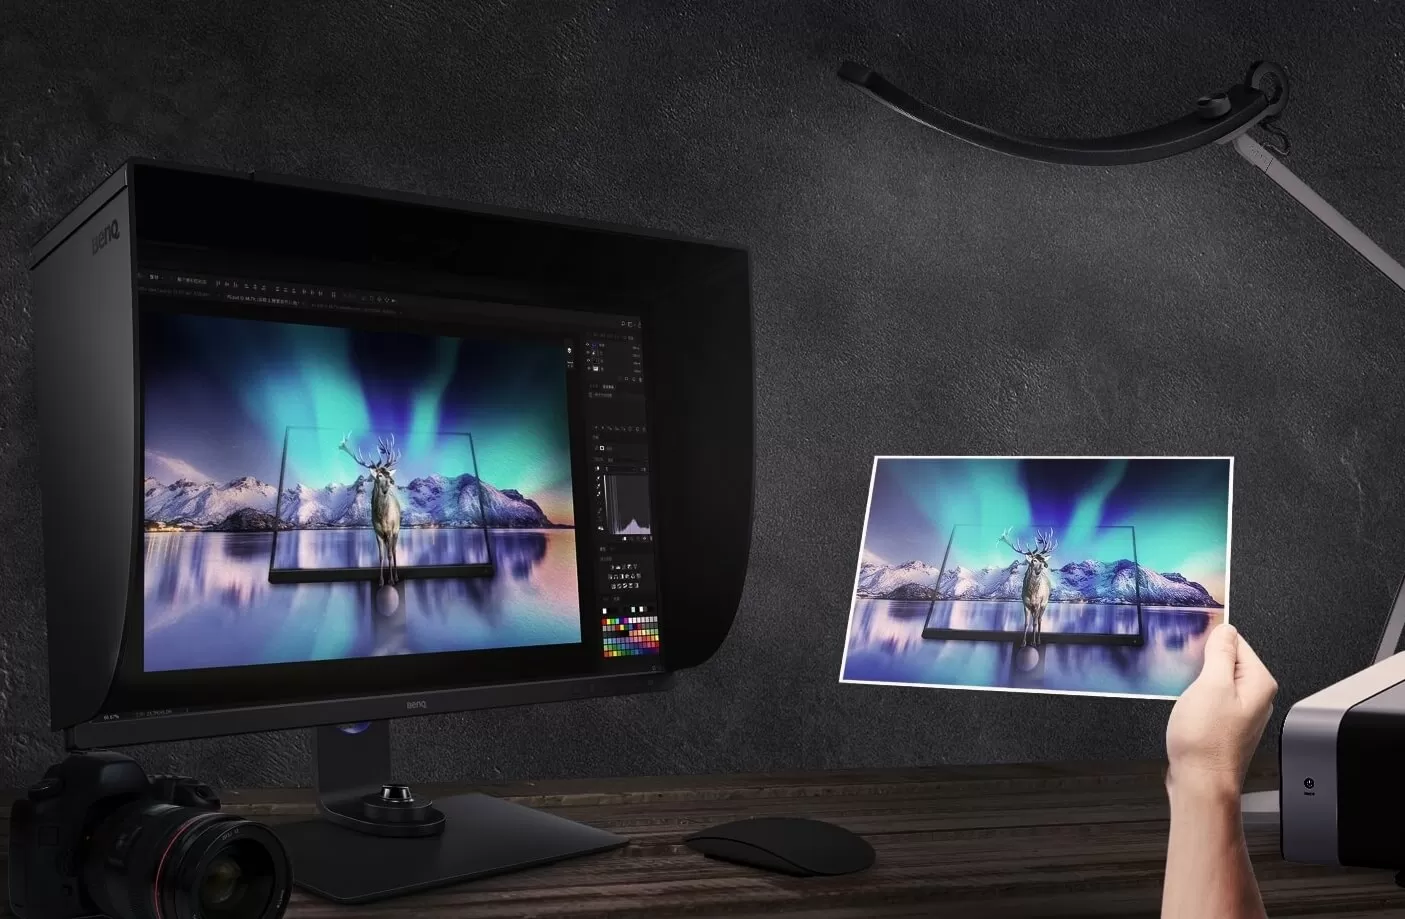 BenQ's new SW321C monitor shows what images will look like when printed out